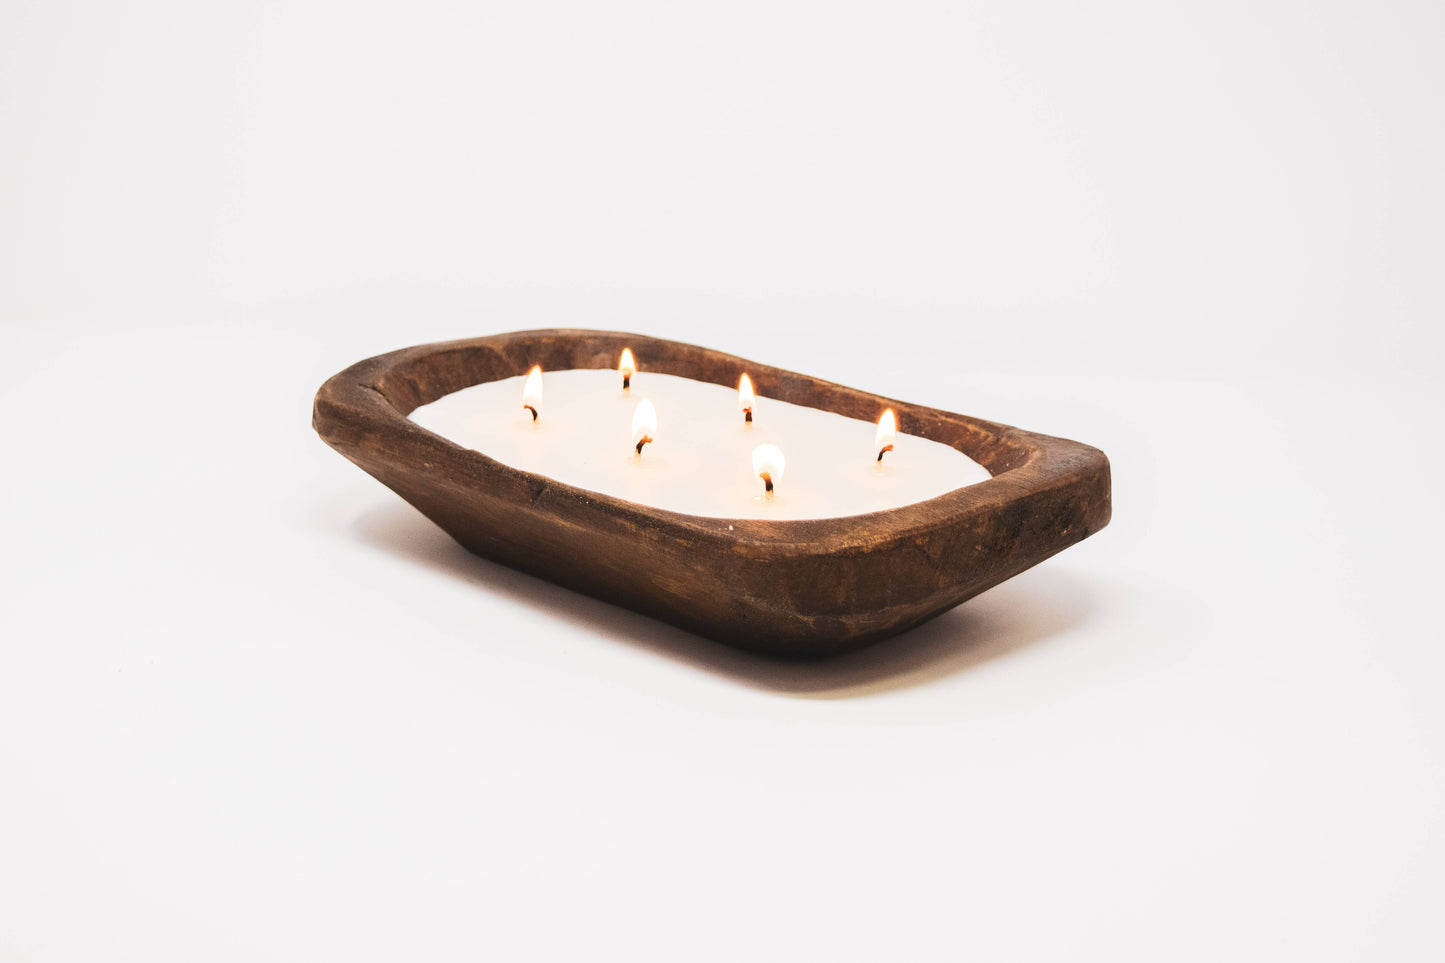 Handcrafted Rustic Wood Bowl Candle (Tobacco and Vanilla Tones)